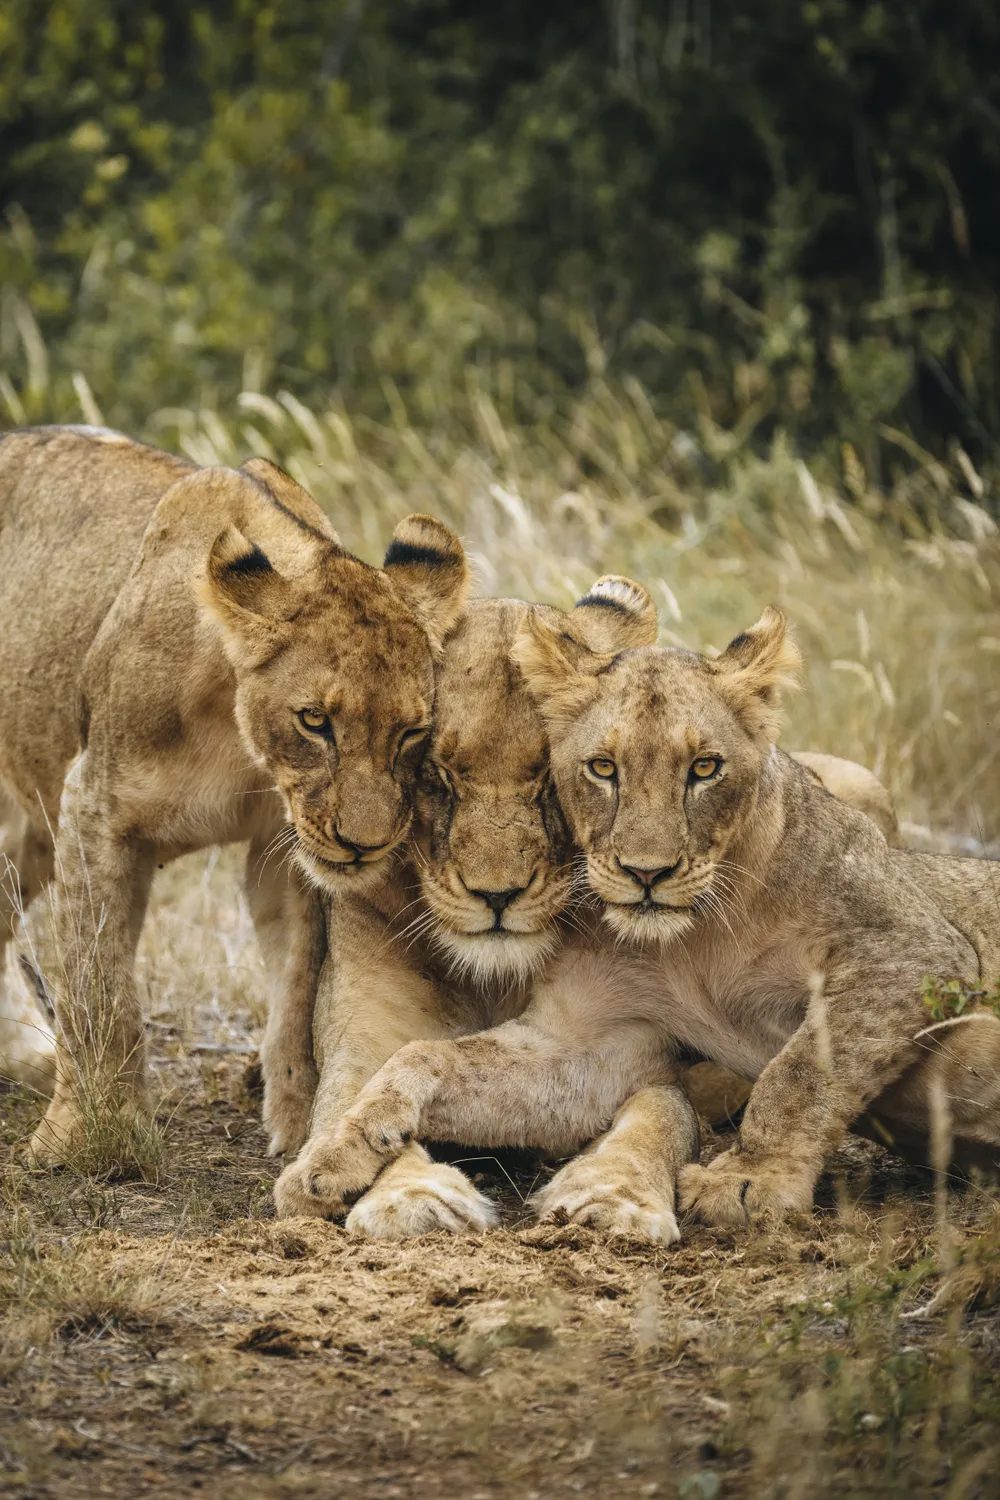 After feasting on a recent kill two cubs wander over to their resting mother. Where they take time to show their affection. 
While shooting this pride I was really able to see and document the bonds that are shared between pride members. I was drawn to this photo as it showed these bonds but also showed the constant awareness lions have of their surroundings. While these cubs might be having a relaxing moment they are still acutely aware of our presence.